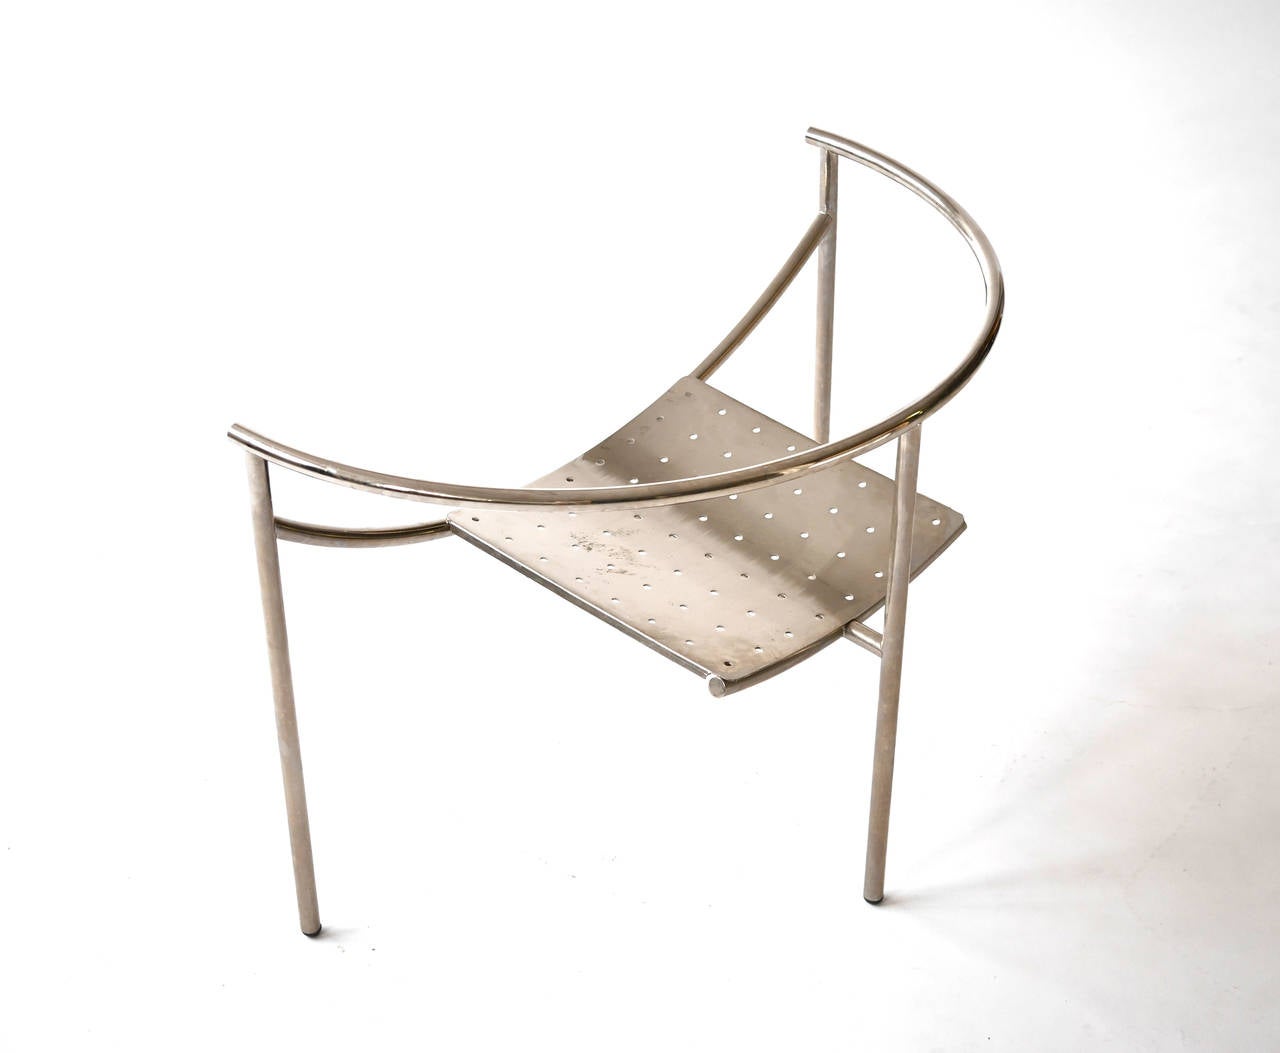 Philippe Starck "Doctor Sonderbar" chair. Original production by XO from 1983-1989.